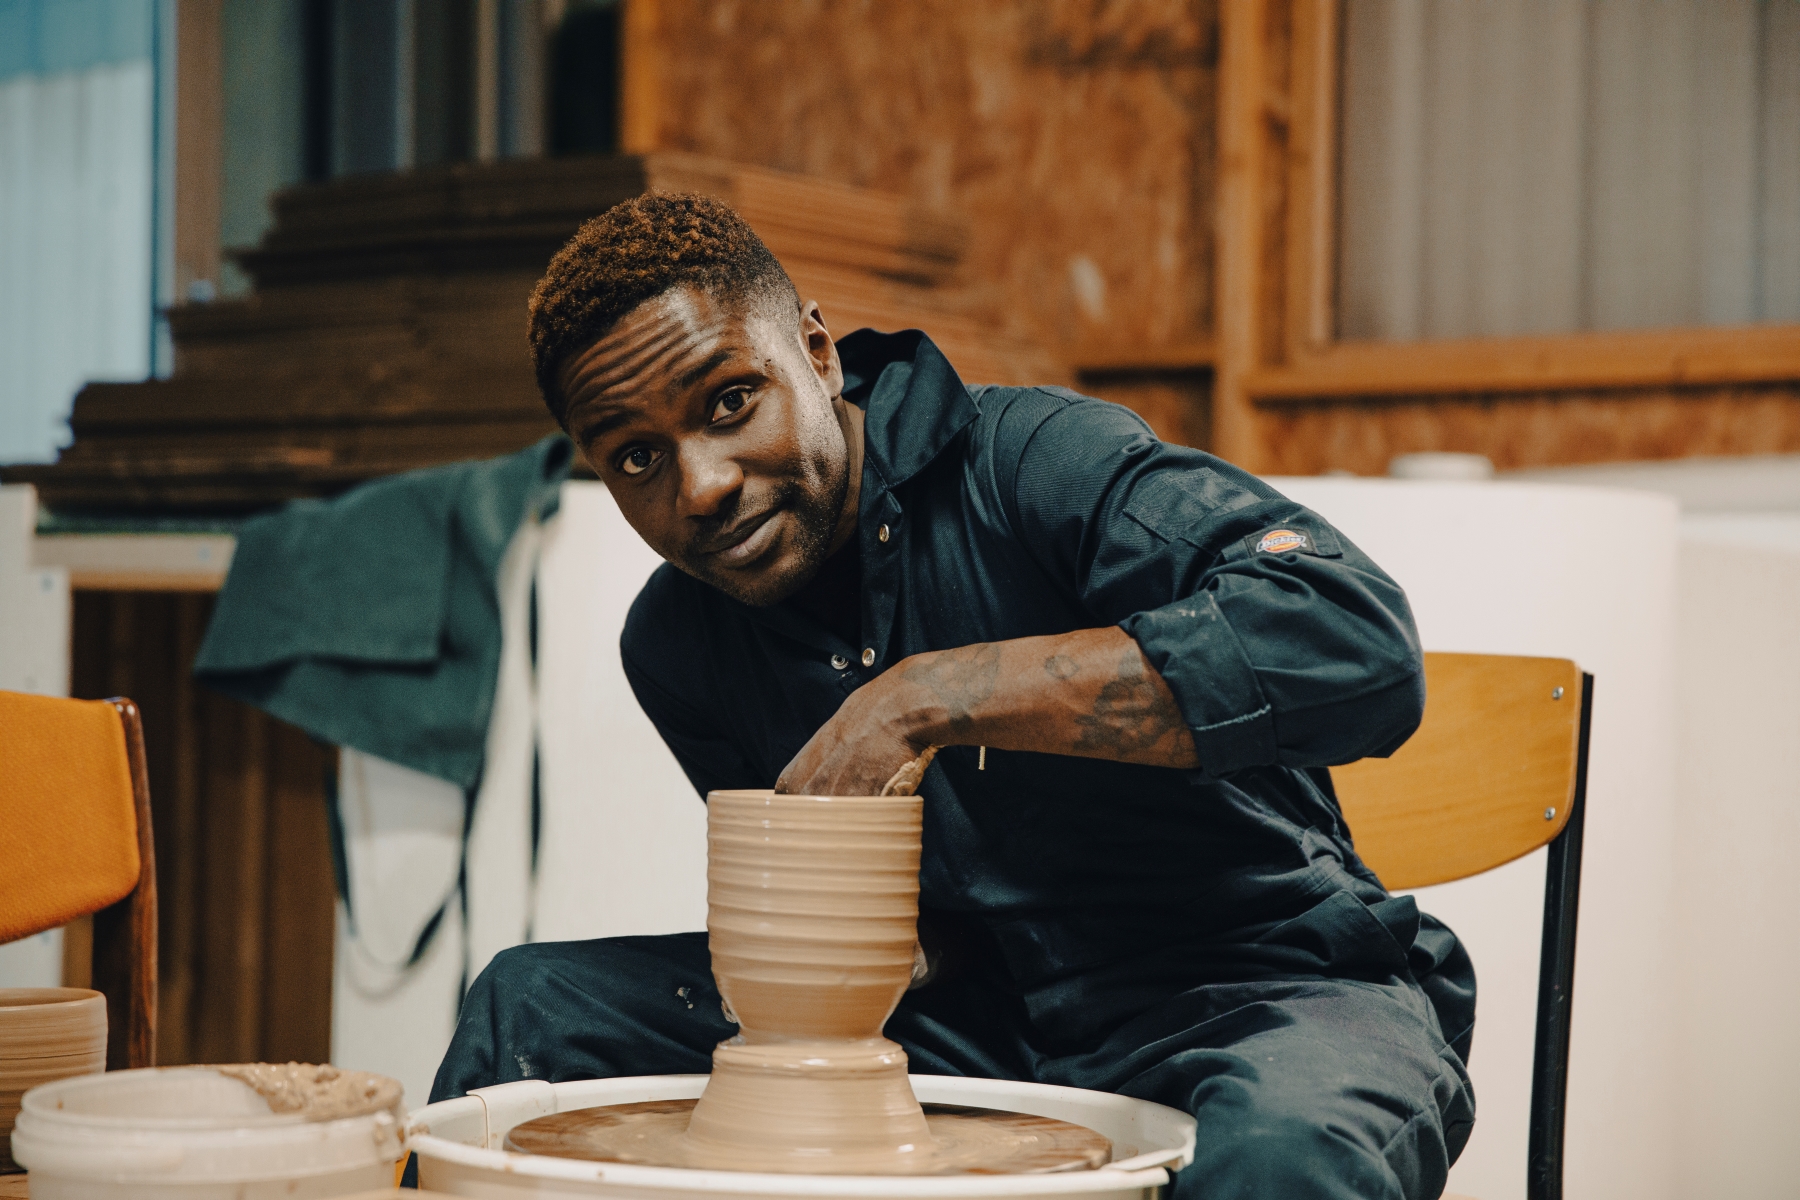 King Houndekpinkou is an artist from Paris, France, who uses ceramics to express his inner self and connect artists from different continents.